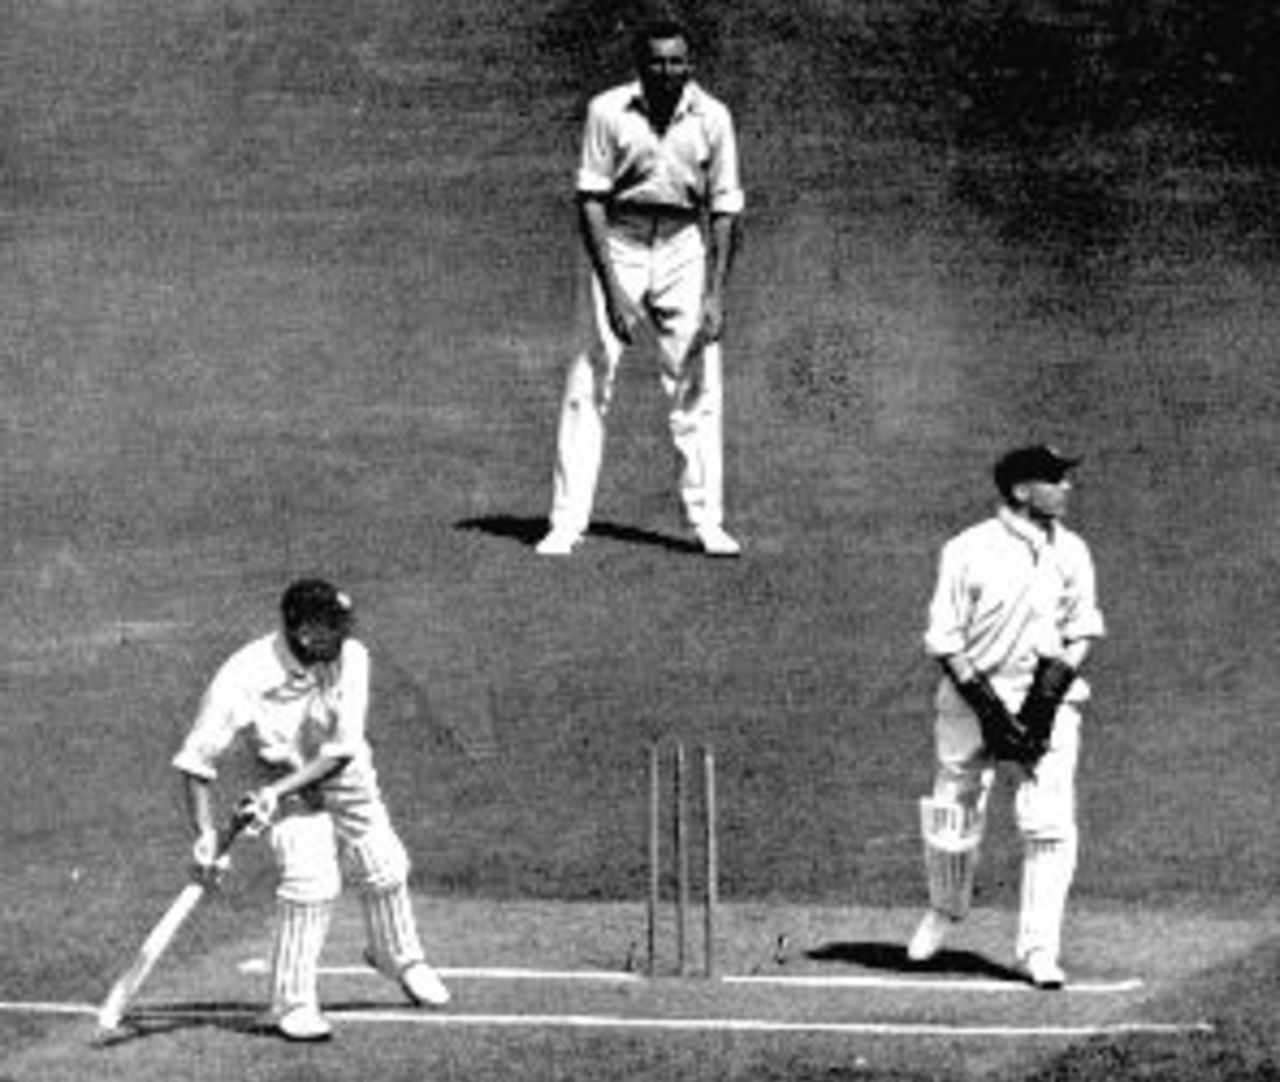 Australia v England, 1924-5. 4th Test, Hobbs stumped by Oldfield. Hobbs had lifted his foot for a second.